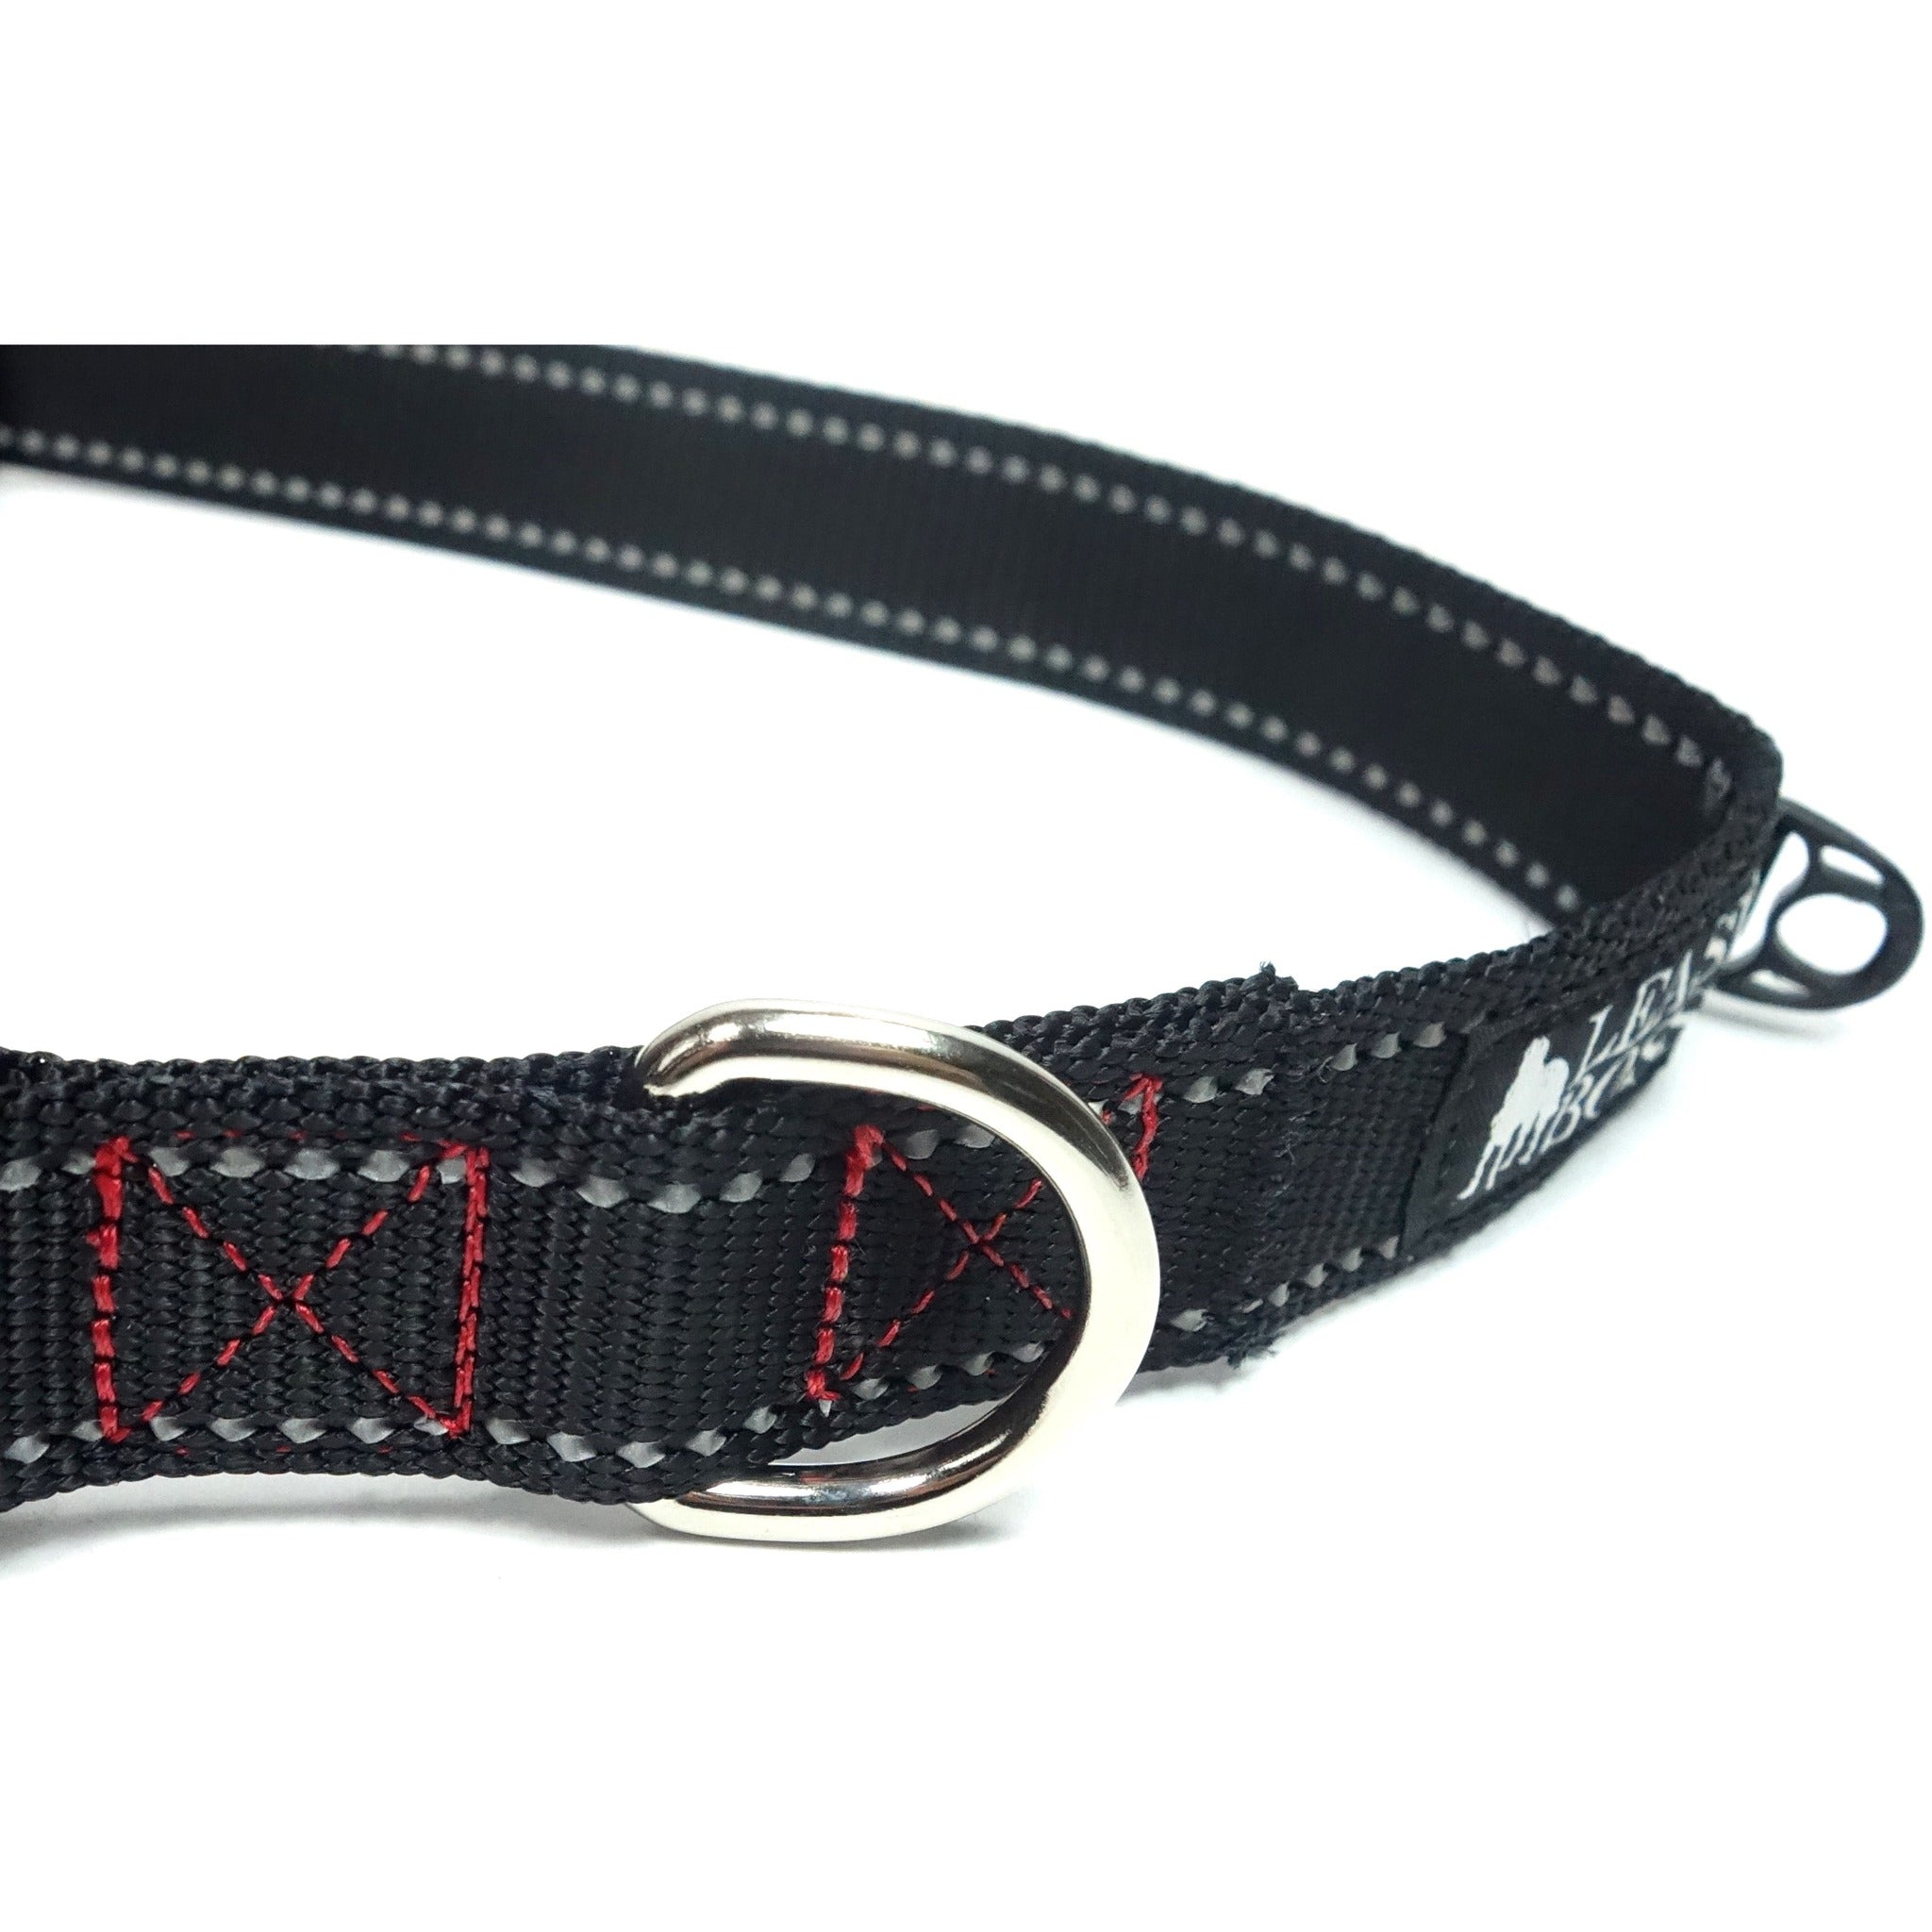 reflective dog collars and leashes